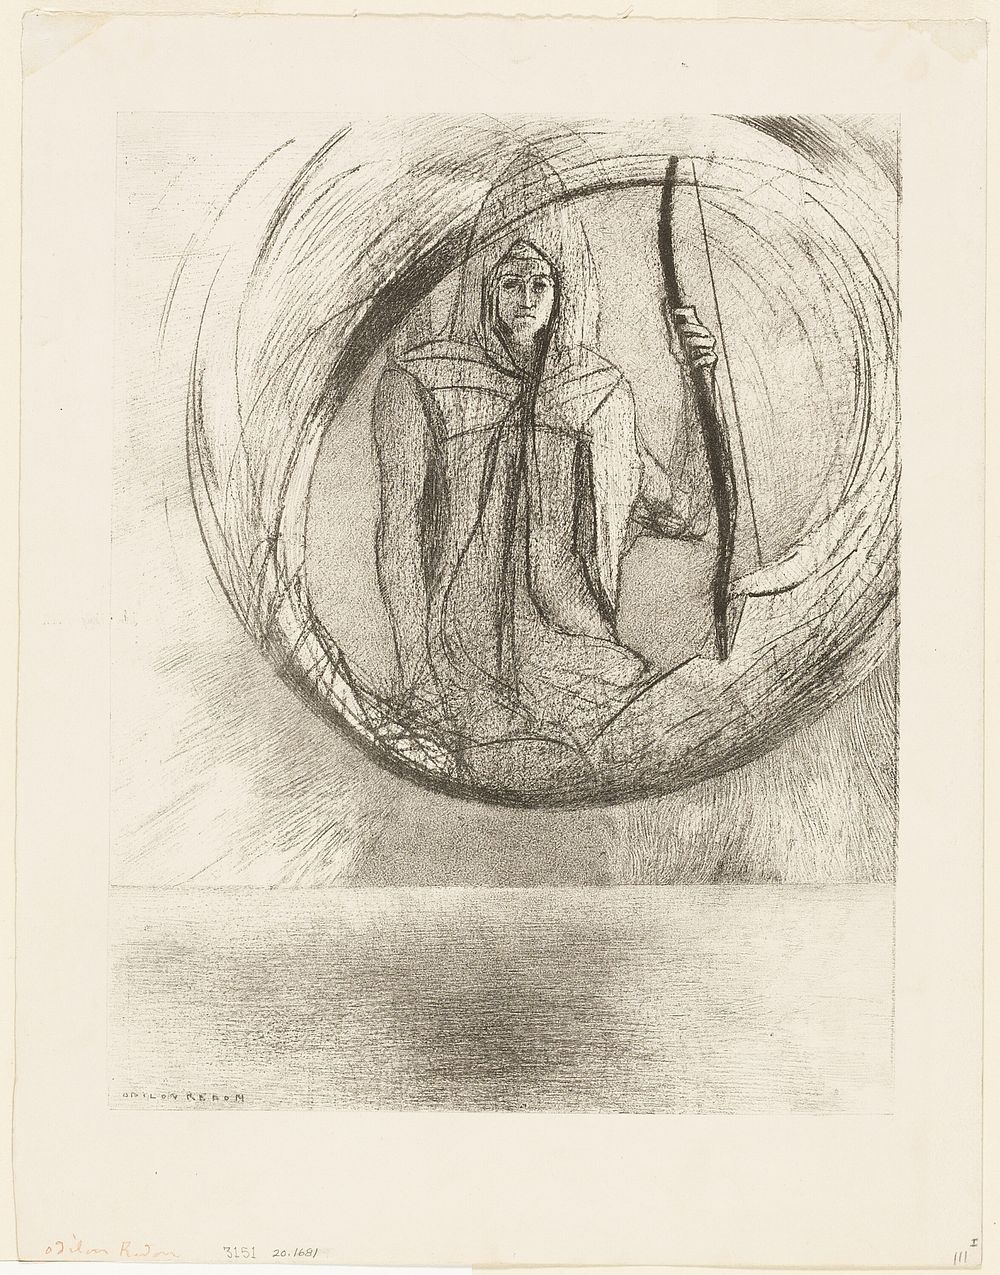 And Beyond, the Astral Idol, the Apotheosis, plate 2 of 6 by Odilon Redon